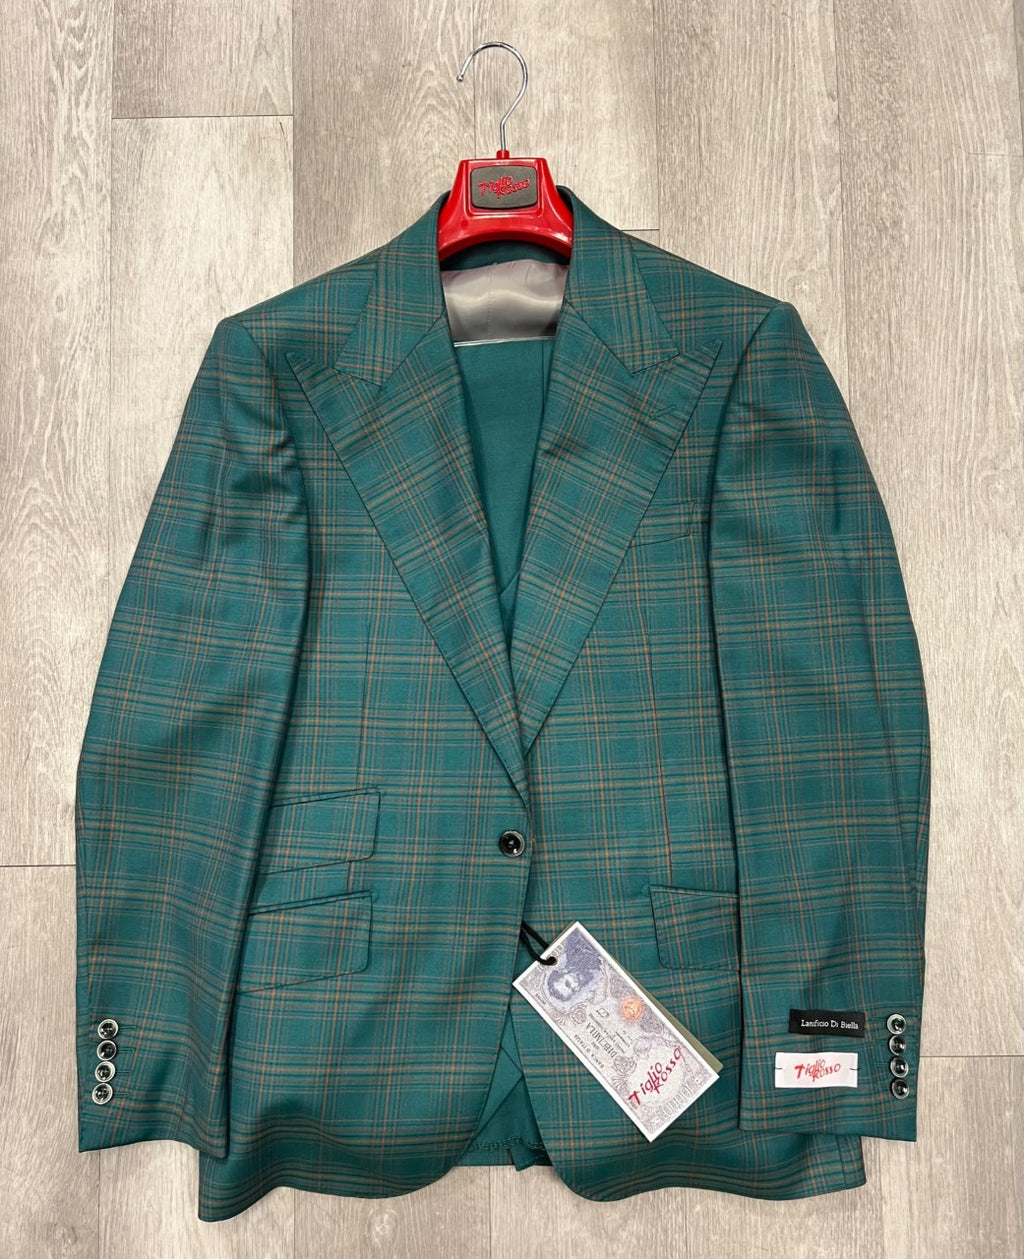 Tiglio Rosso Orvietto Green/Camel Plaid Wool Suit/Vest TL2609/10 (Single Pleated Regular Fit)